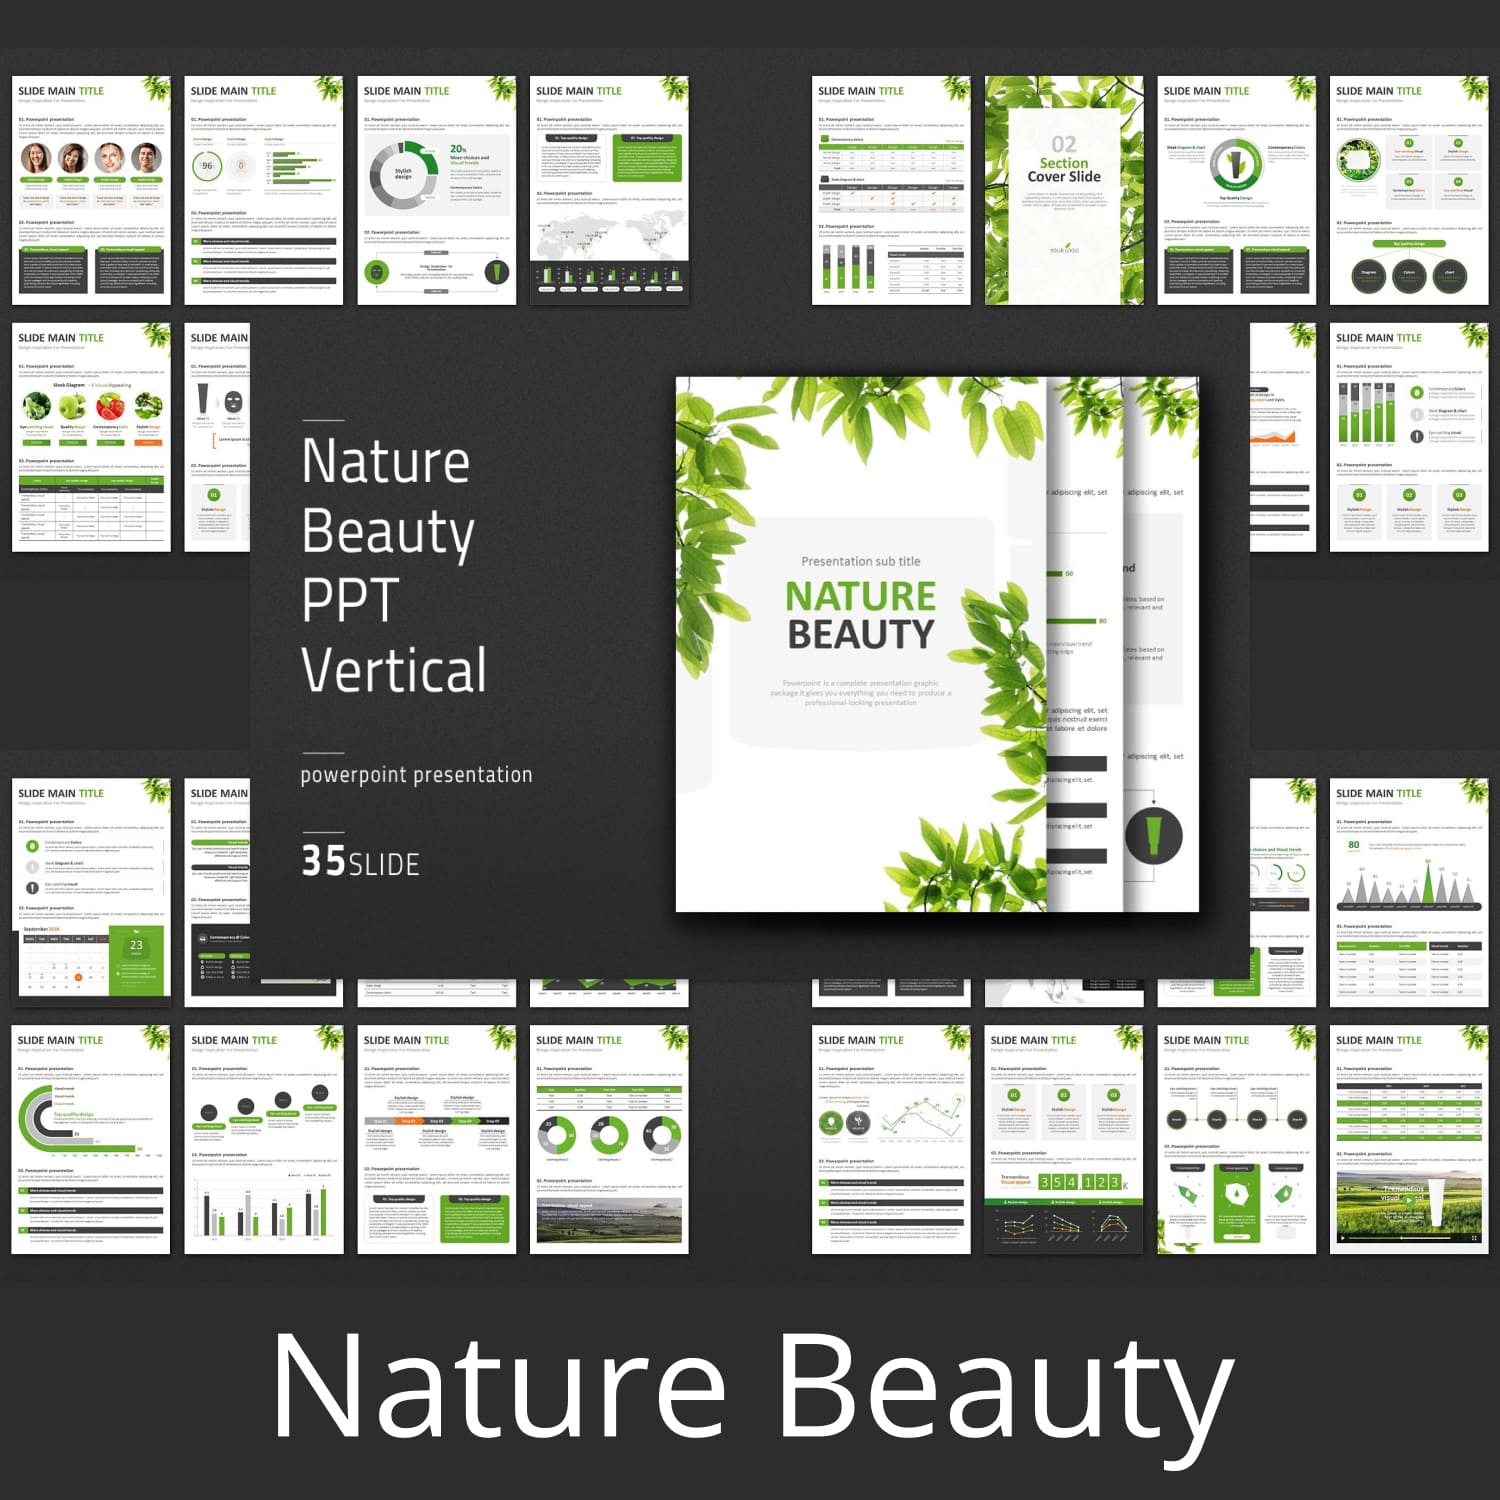 This Nature Beauty PPT Vertical presentation template contains various sources that are necessary and useful to make your presentation professional and effective.